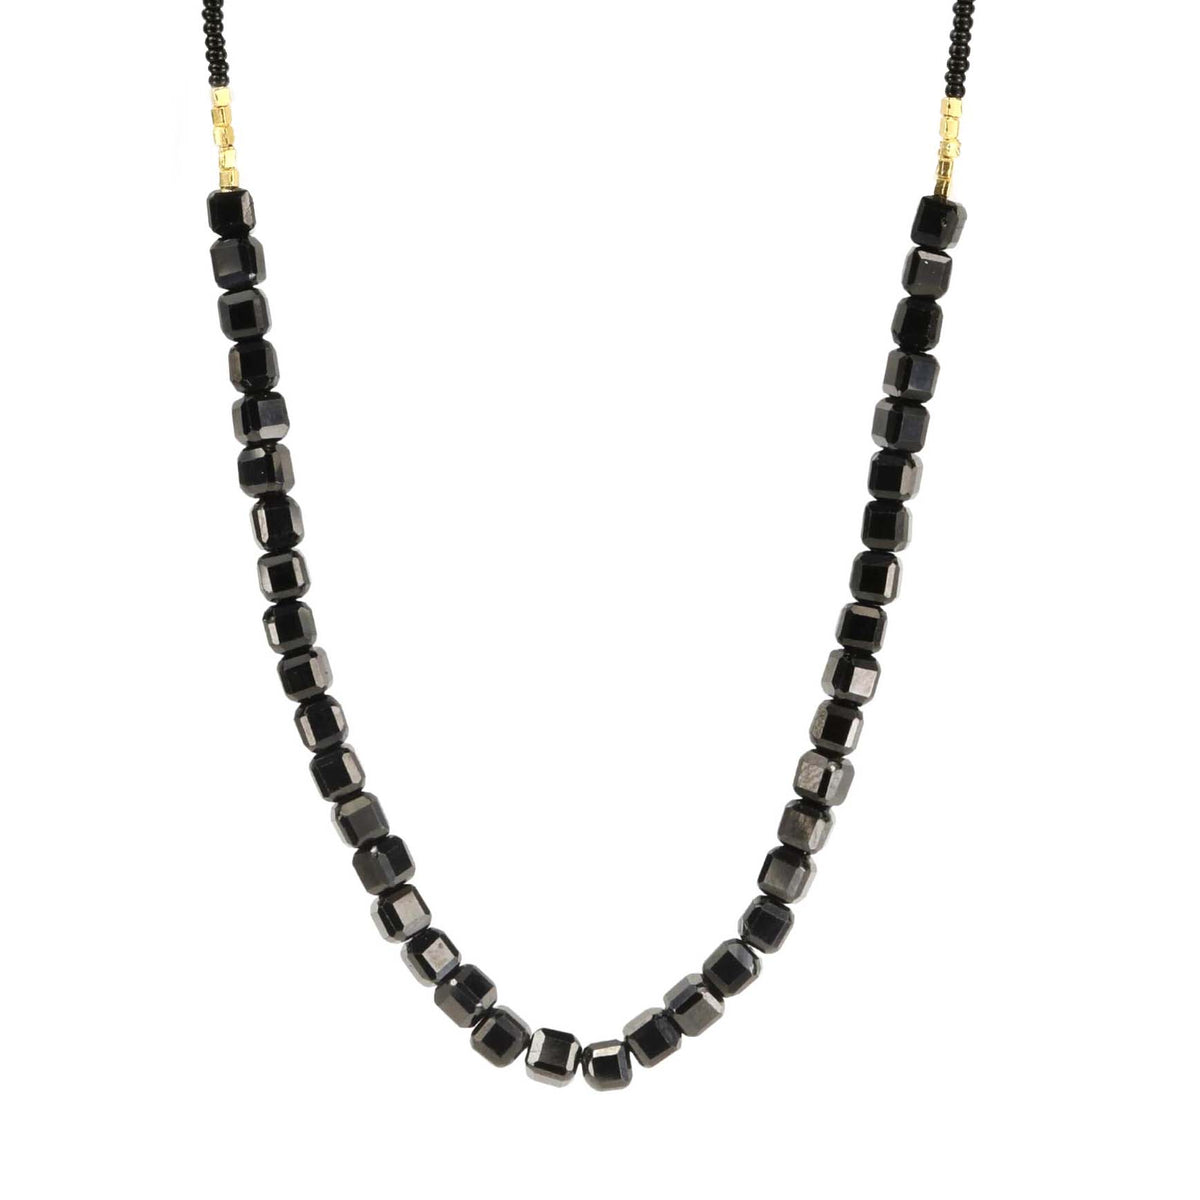 Debbie Fisher Black Seed Necklace with Gold Vermeil and Black Onyx Beads in Center